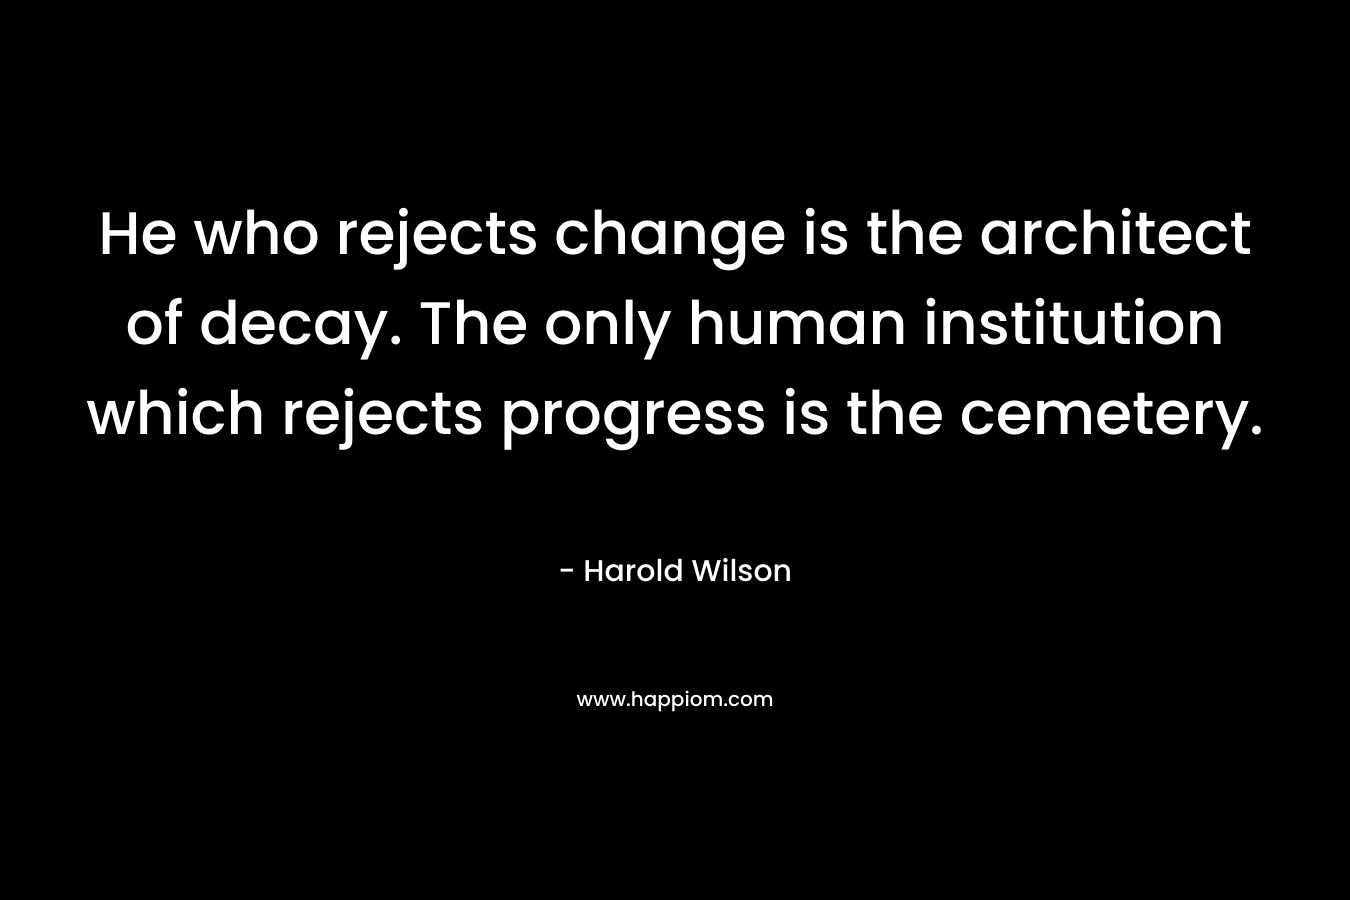 He who rejects change is the architect of decay. The only human institution which rejects progress is the cemetery. – Harold Wilson